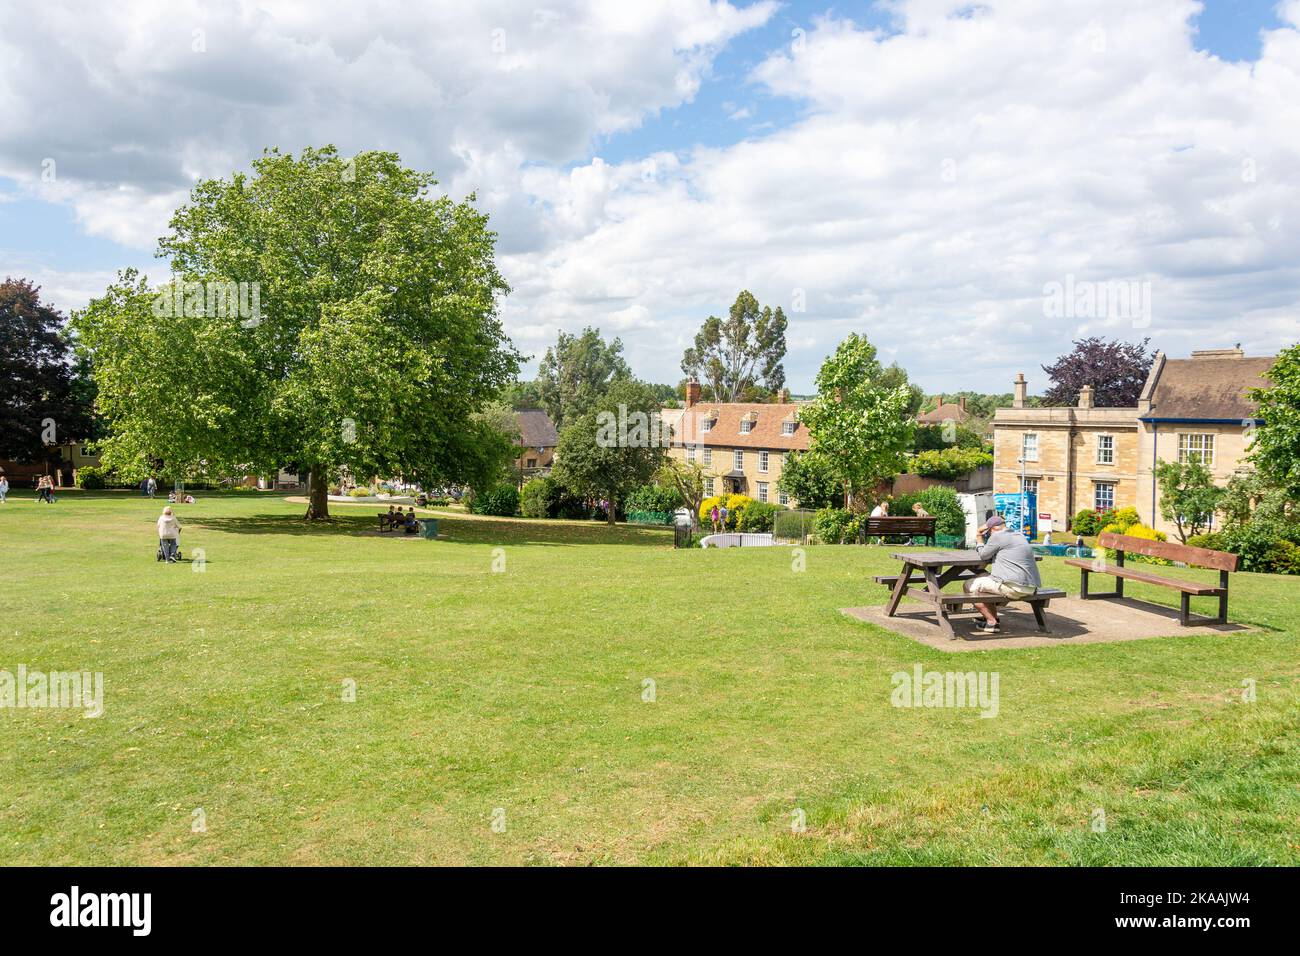 View of town from Peace Memorial Park, Thrapston, Northamptonshire, England, United Kingdom Stock Photo